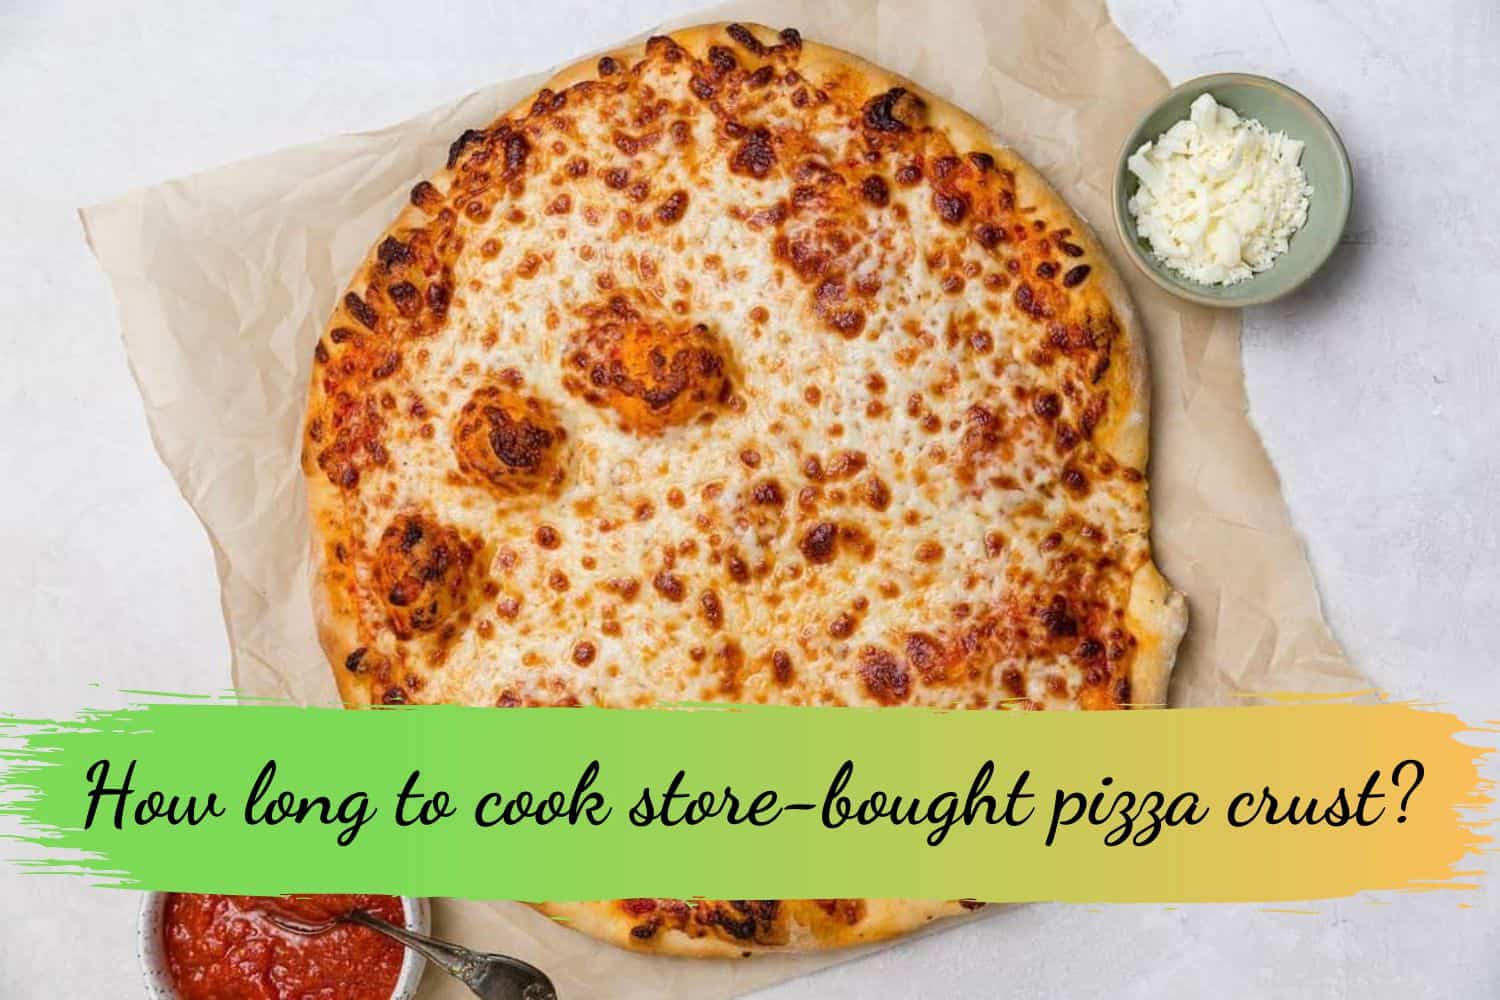 How long to cook store-bought pizza crust?